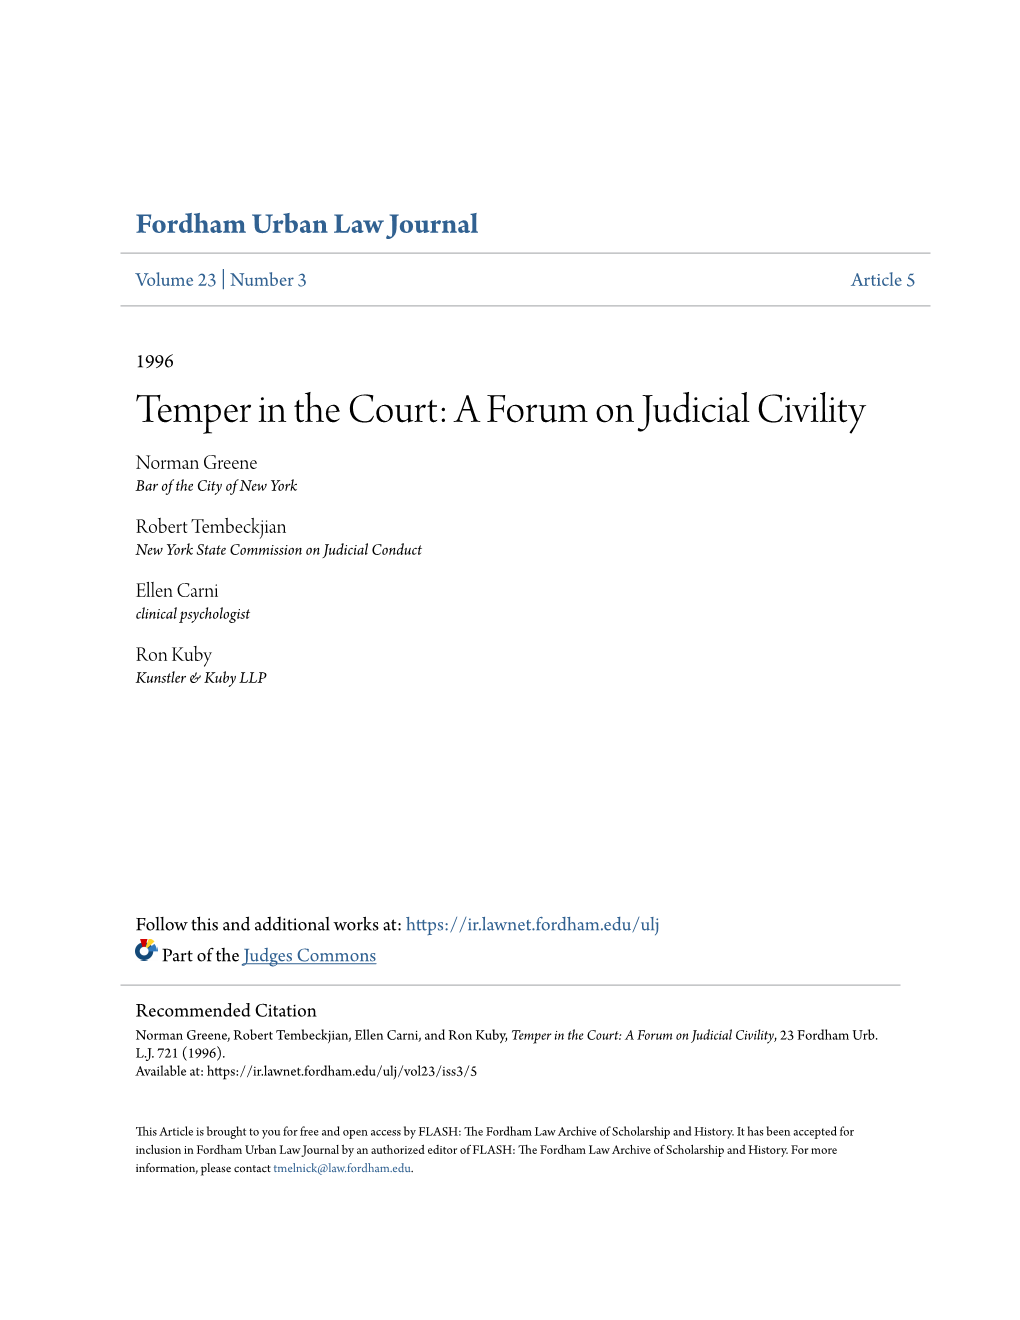 A Forum on Judicial Civility Norman Greene Bar of the City of New York